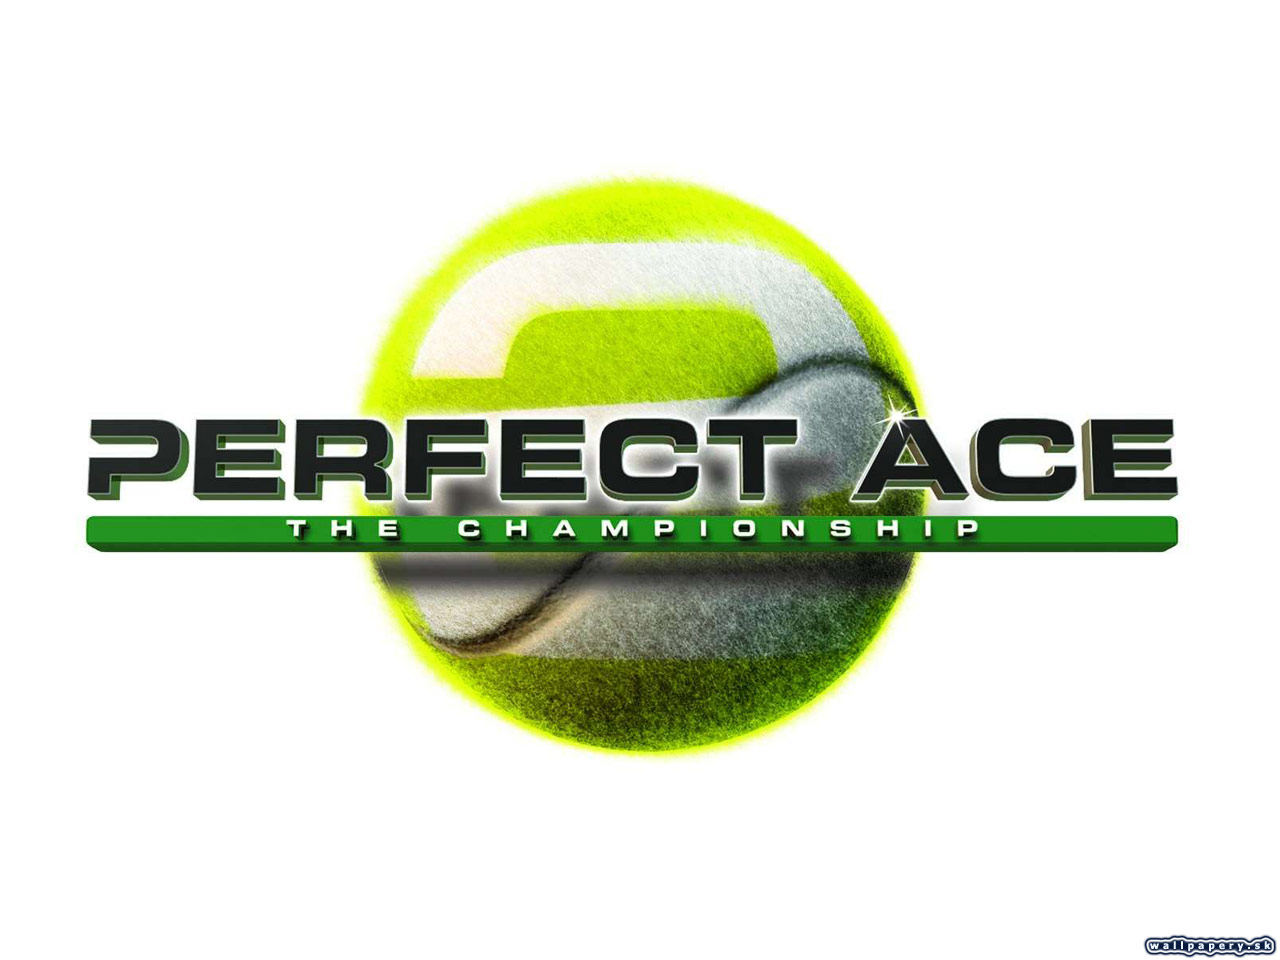 Perfect Ace 2: The Championships - wallpaper 2